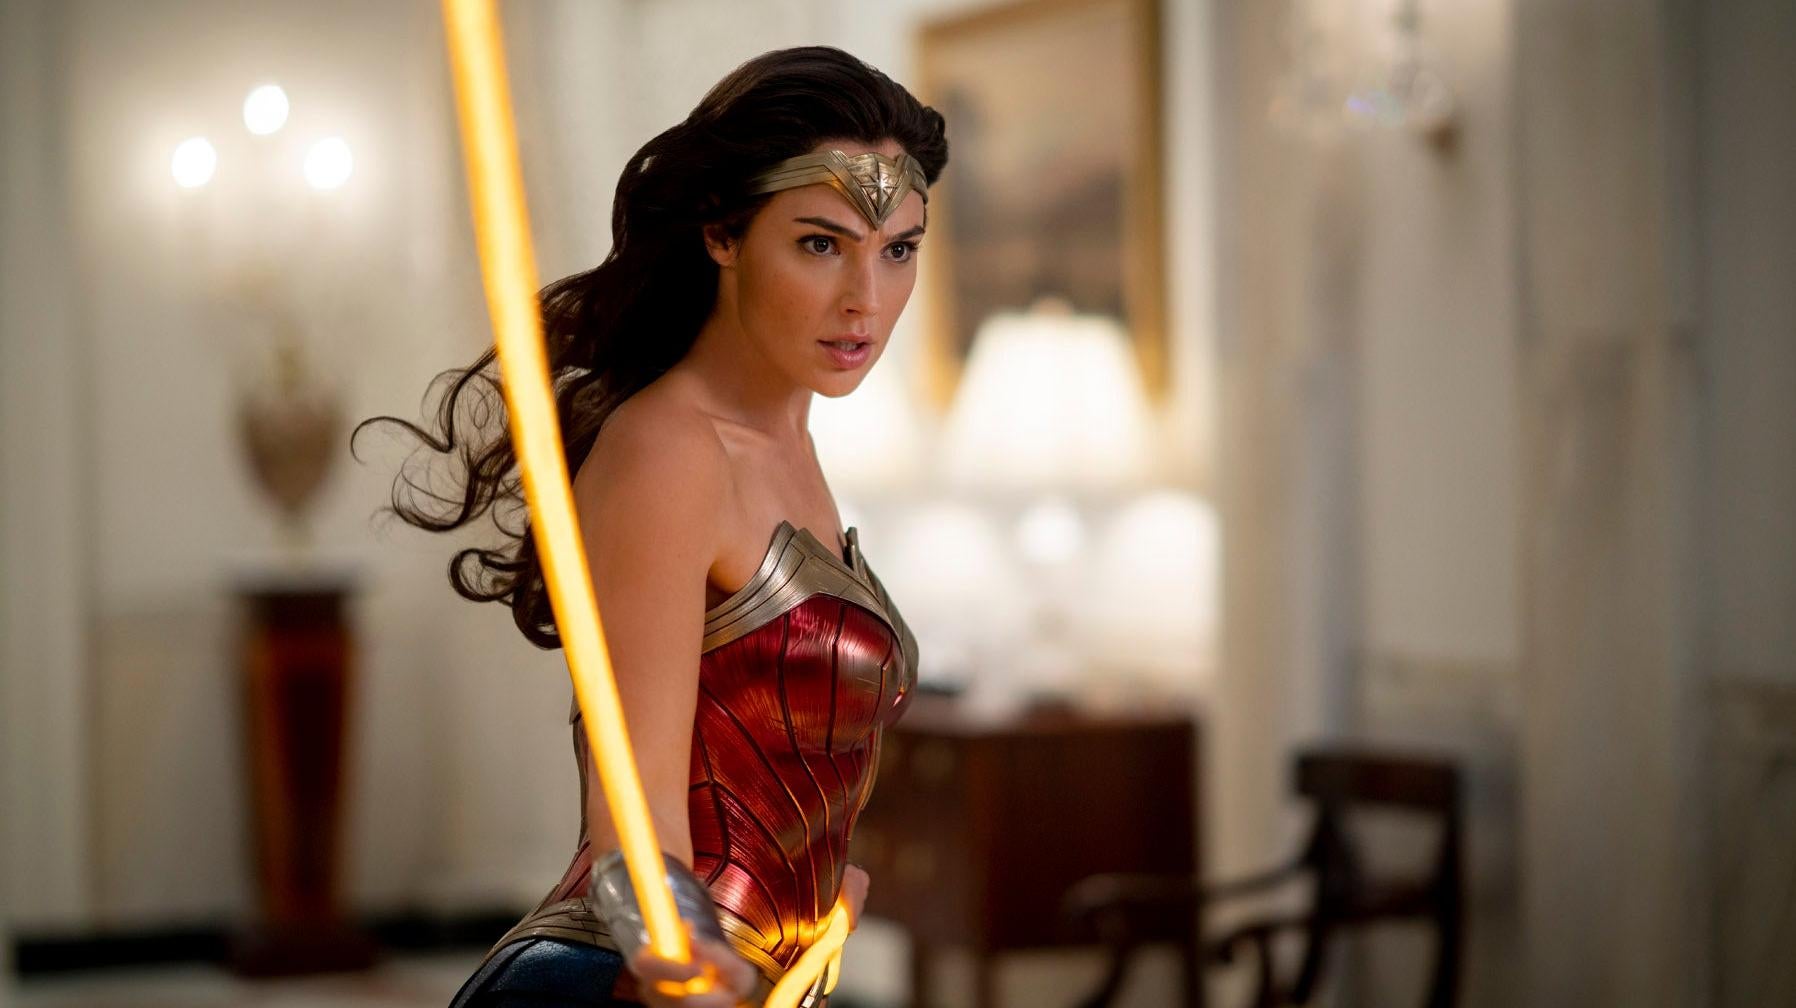 It's unclear if Gal Gadot will return, but she may. (Image: Warner Bros.)